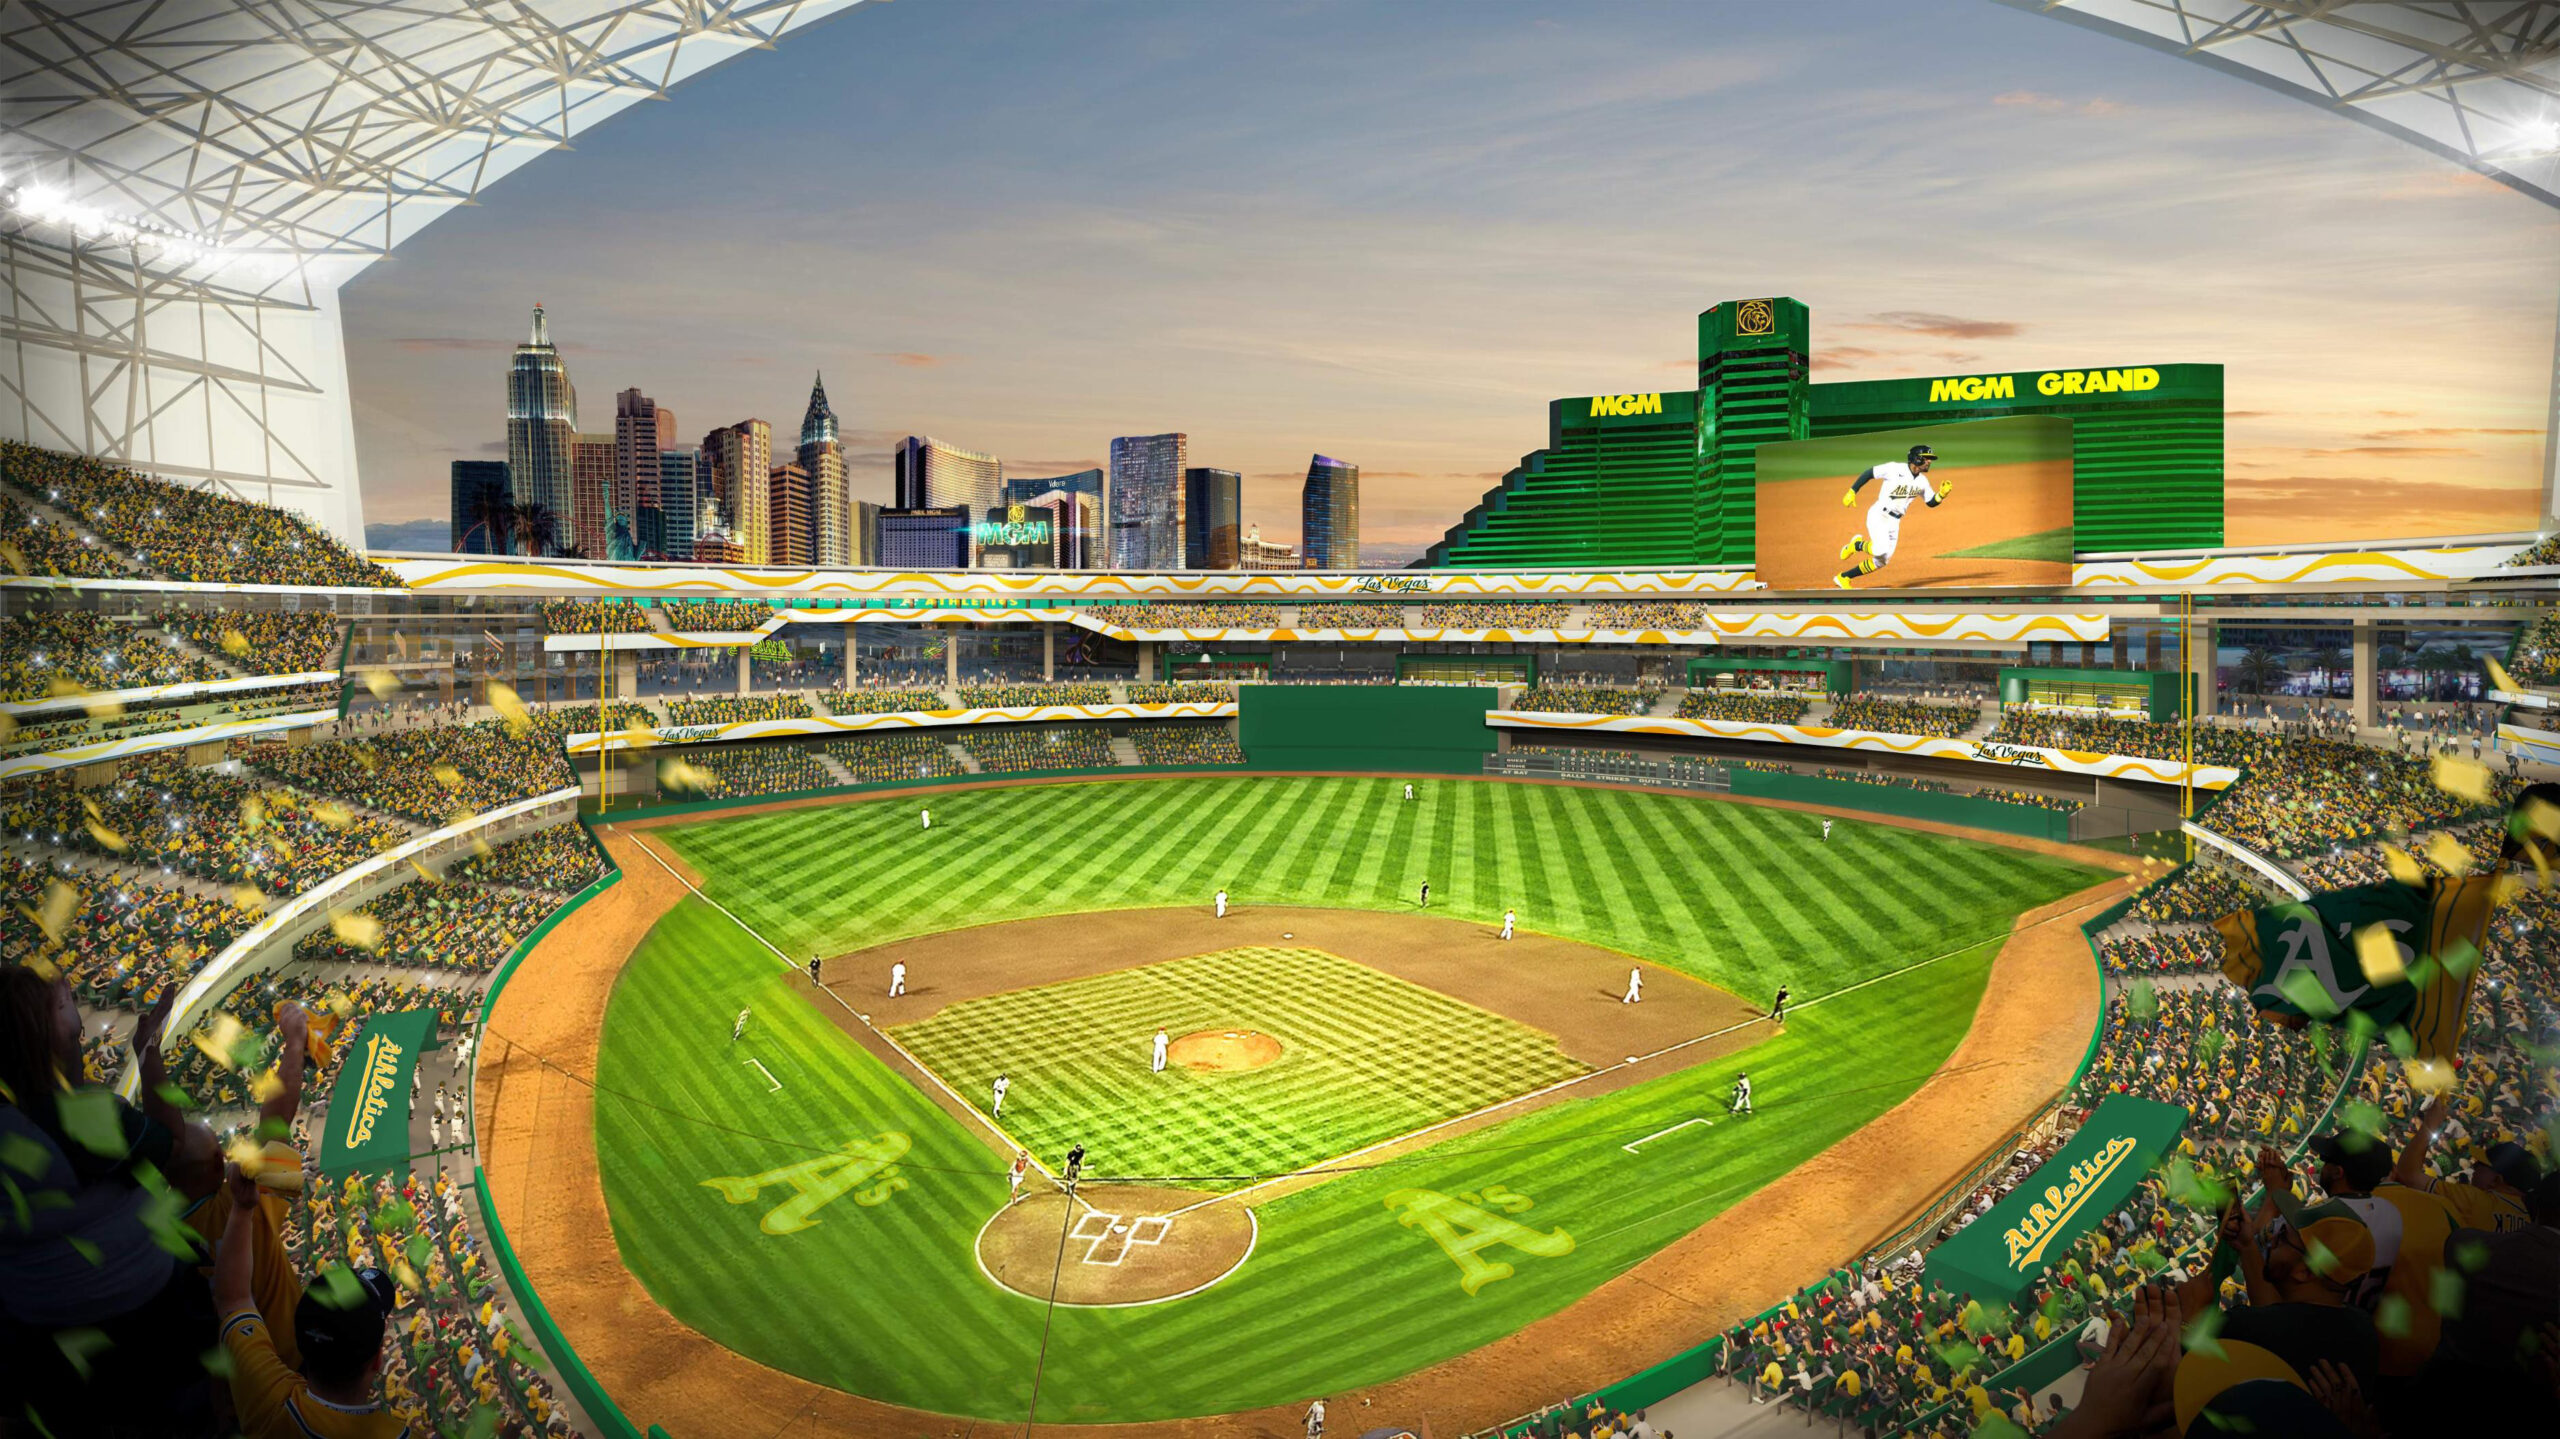 A rendering released in May which shows a view of the Oakland A's proposed new ballpark at the Tropicana site in Las Vegas. 